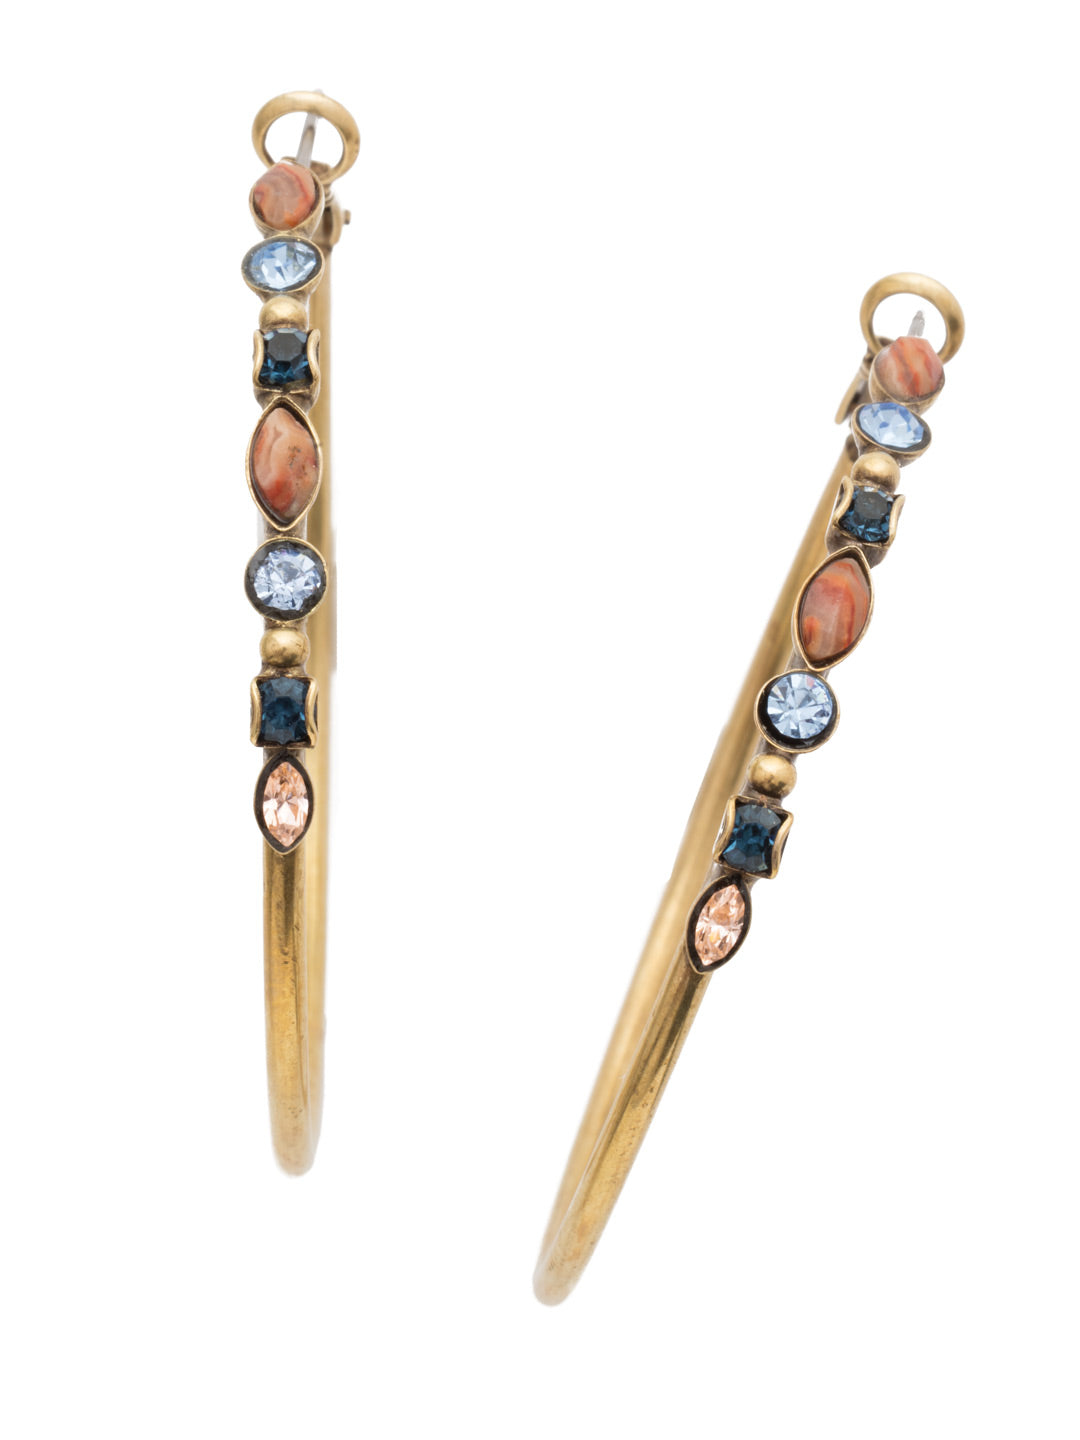 Mixed Media Hoop Earrings - EDK40AGSDE - <p>Hoop earrings with a line of assorted crystals and semi-precious stones that will add the perfect hint of sparkle to your look. From Sorrelli's Selvedge Denim collection in our Antique Gold-tone finish.</p>